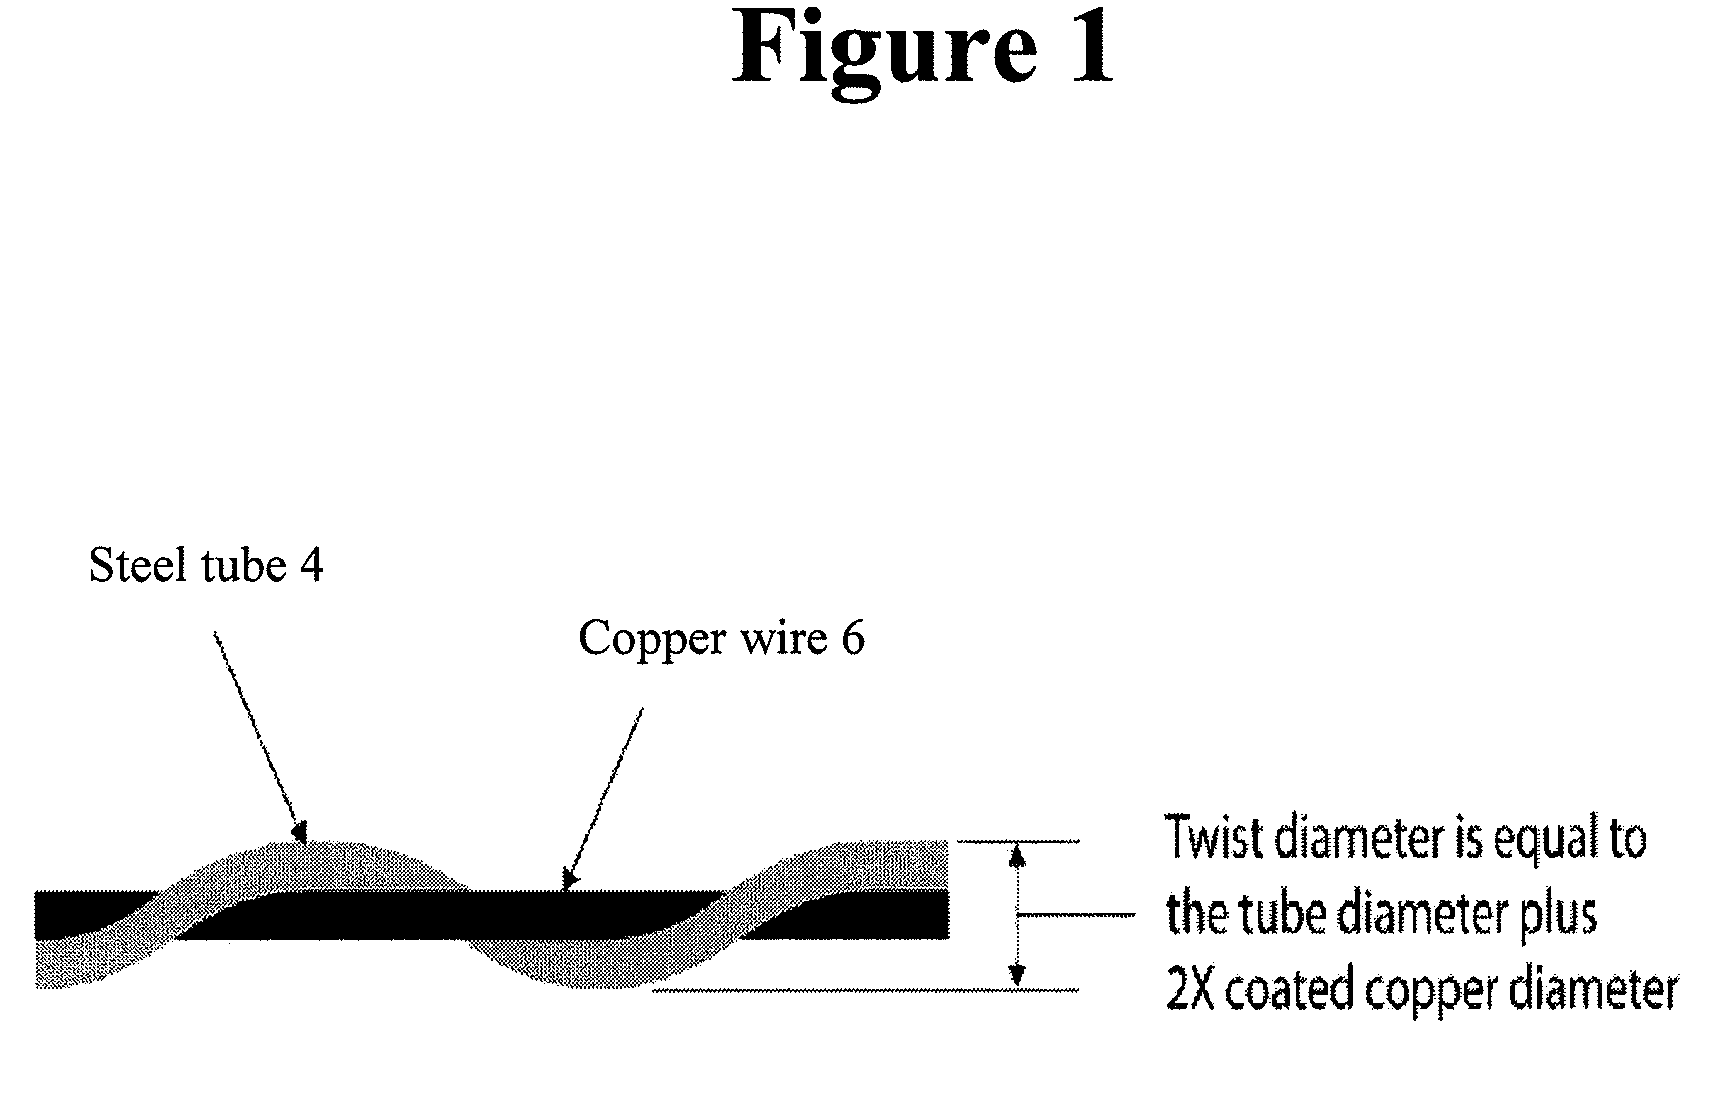 Downhole cables with both fiber and copper elements